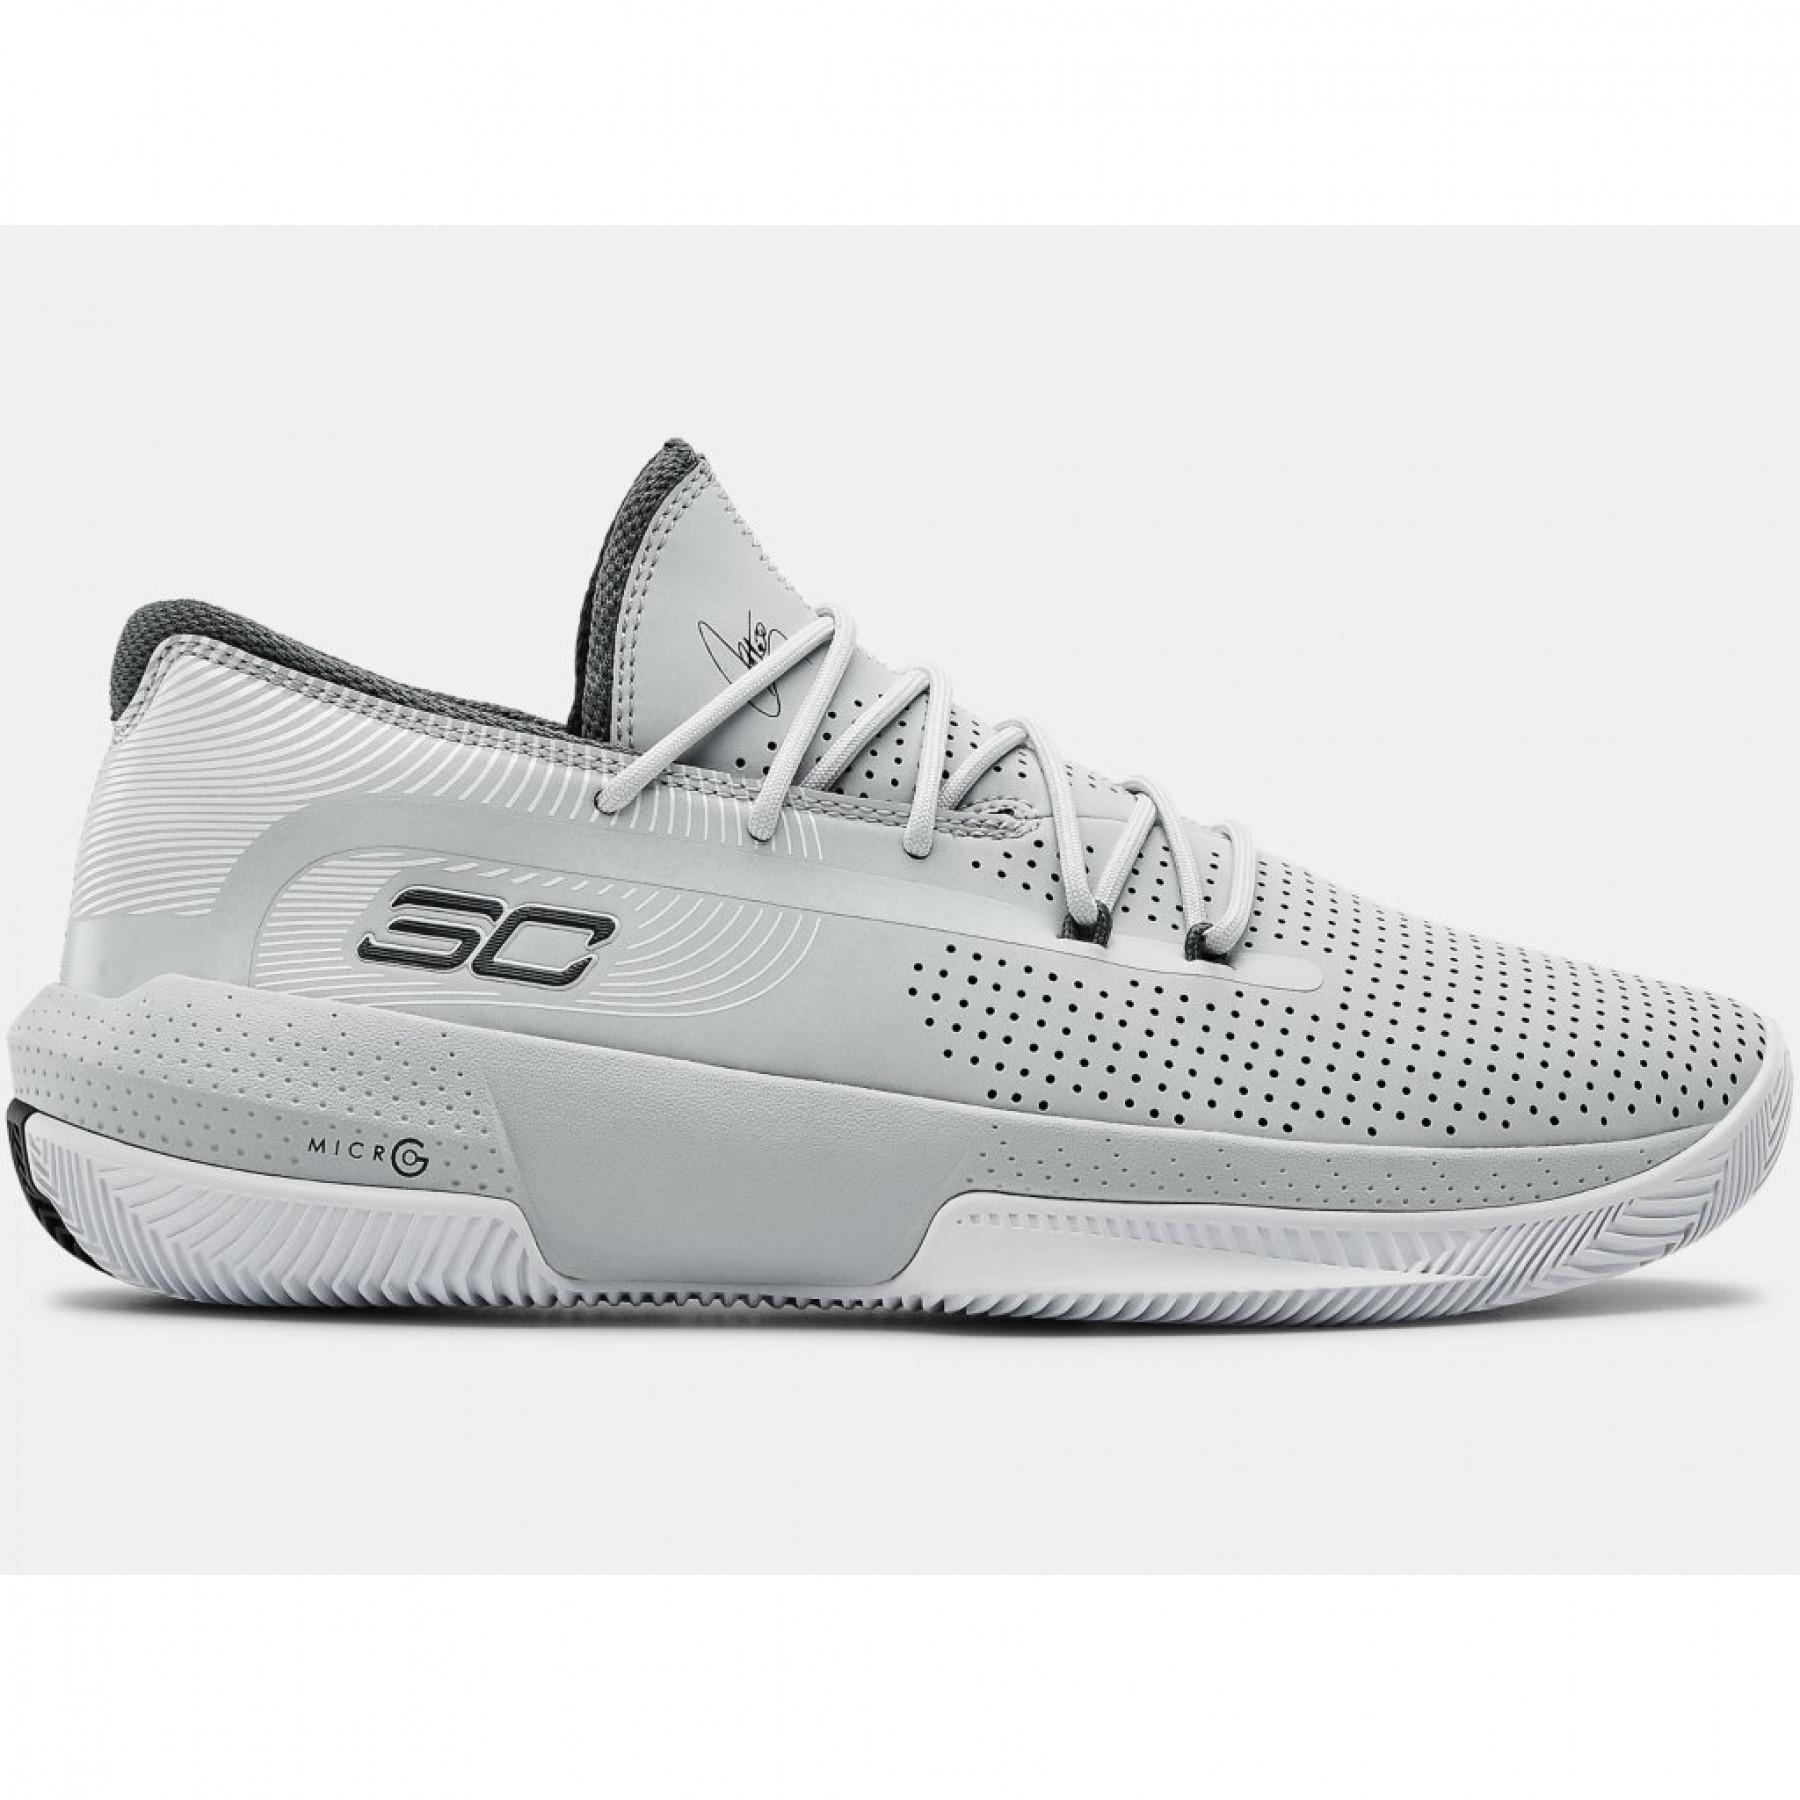 Under Armour Mens SC 3ZER0 III Basketball Shoes Grey Sports Breathable 